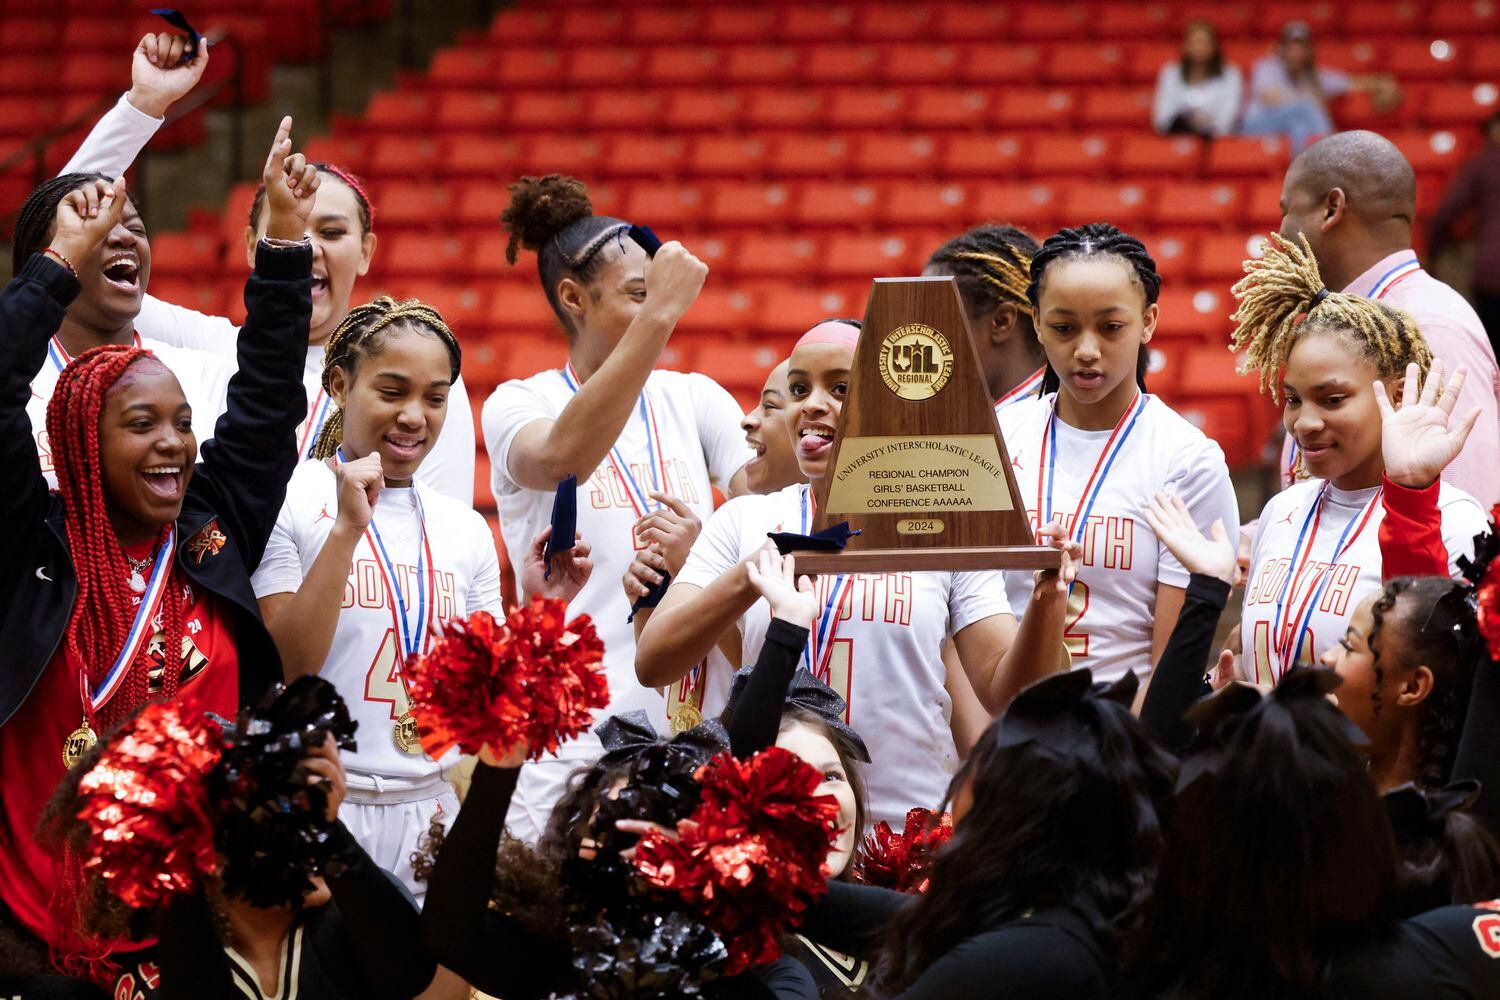 South Grand Prairie celebrate following a 59-44 victory over Fort Worth Boswell High in the...